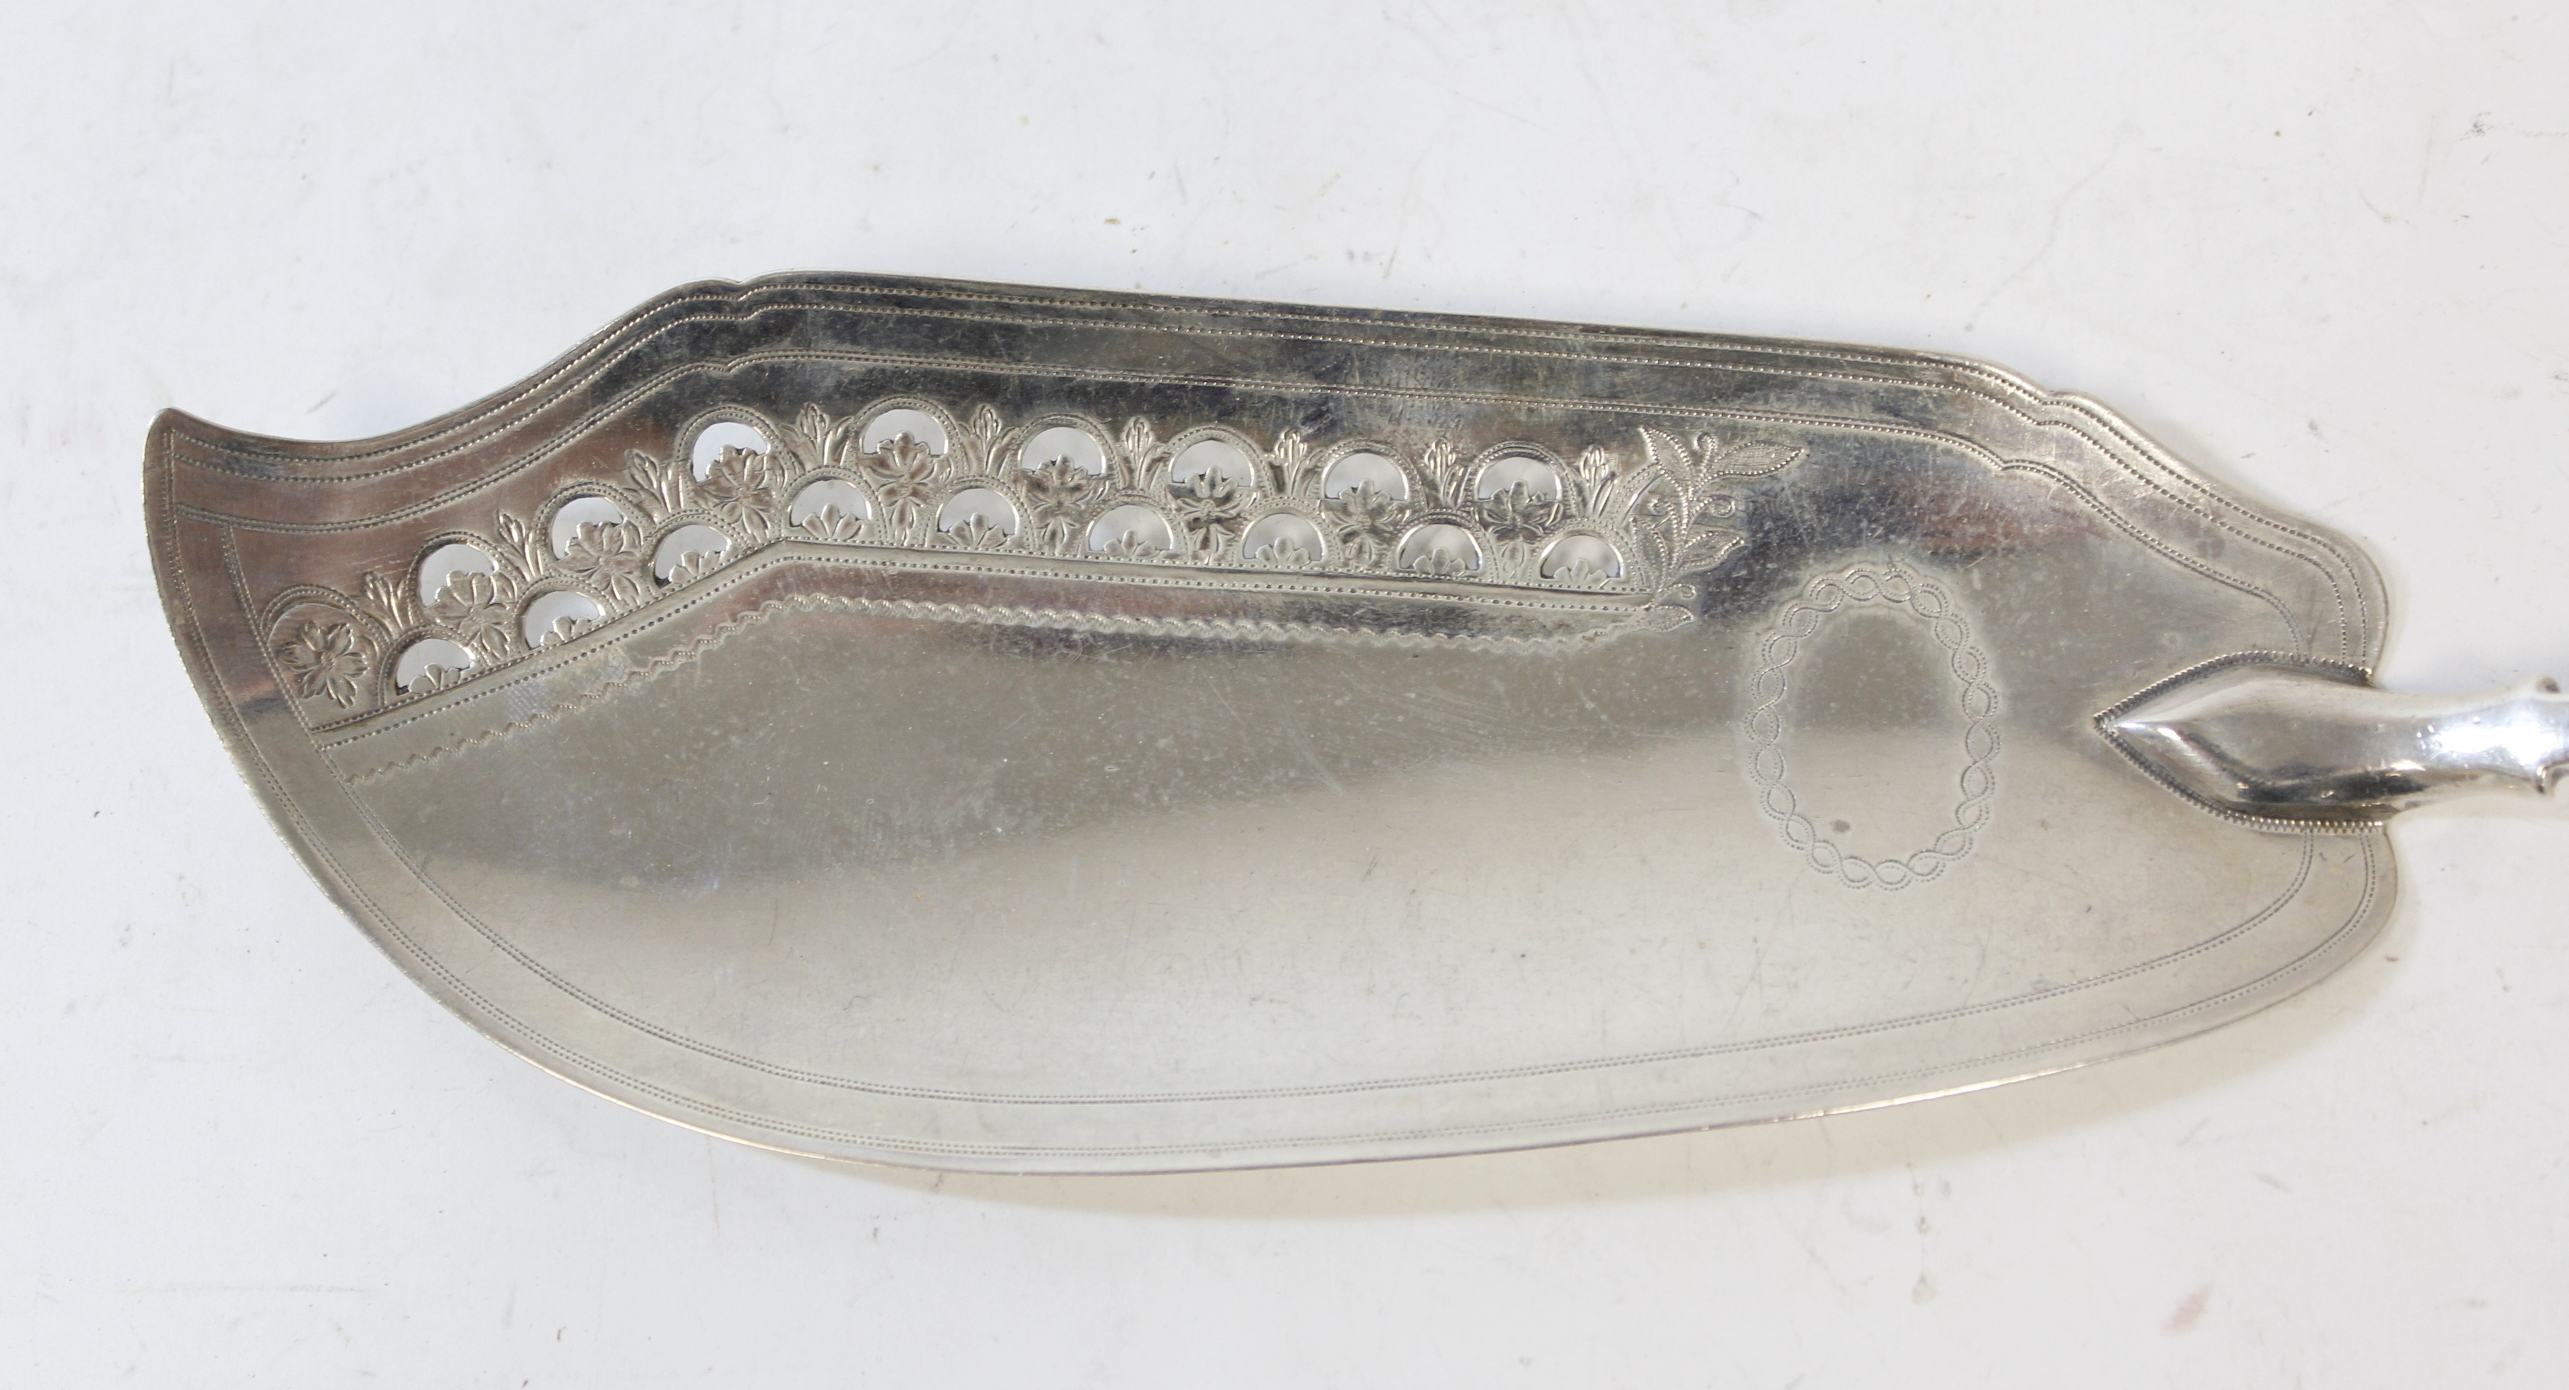 Silver fish server, fiddle pattern, pierced and engraved by Abstainando King, 1808, 3 1/2oz / 123g. - Image 3 of 5